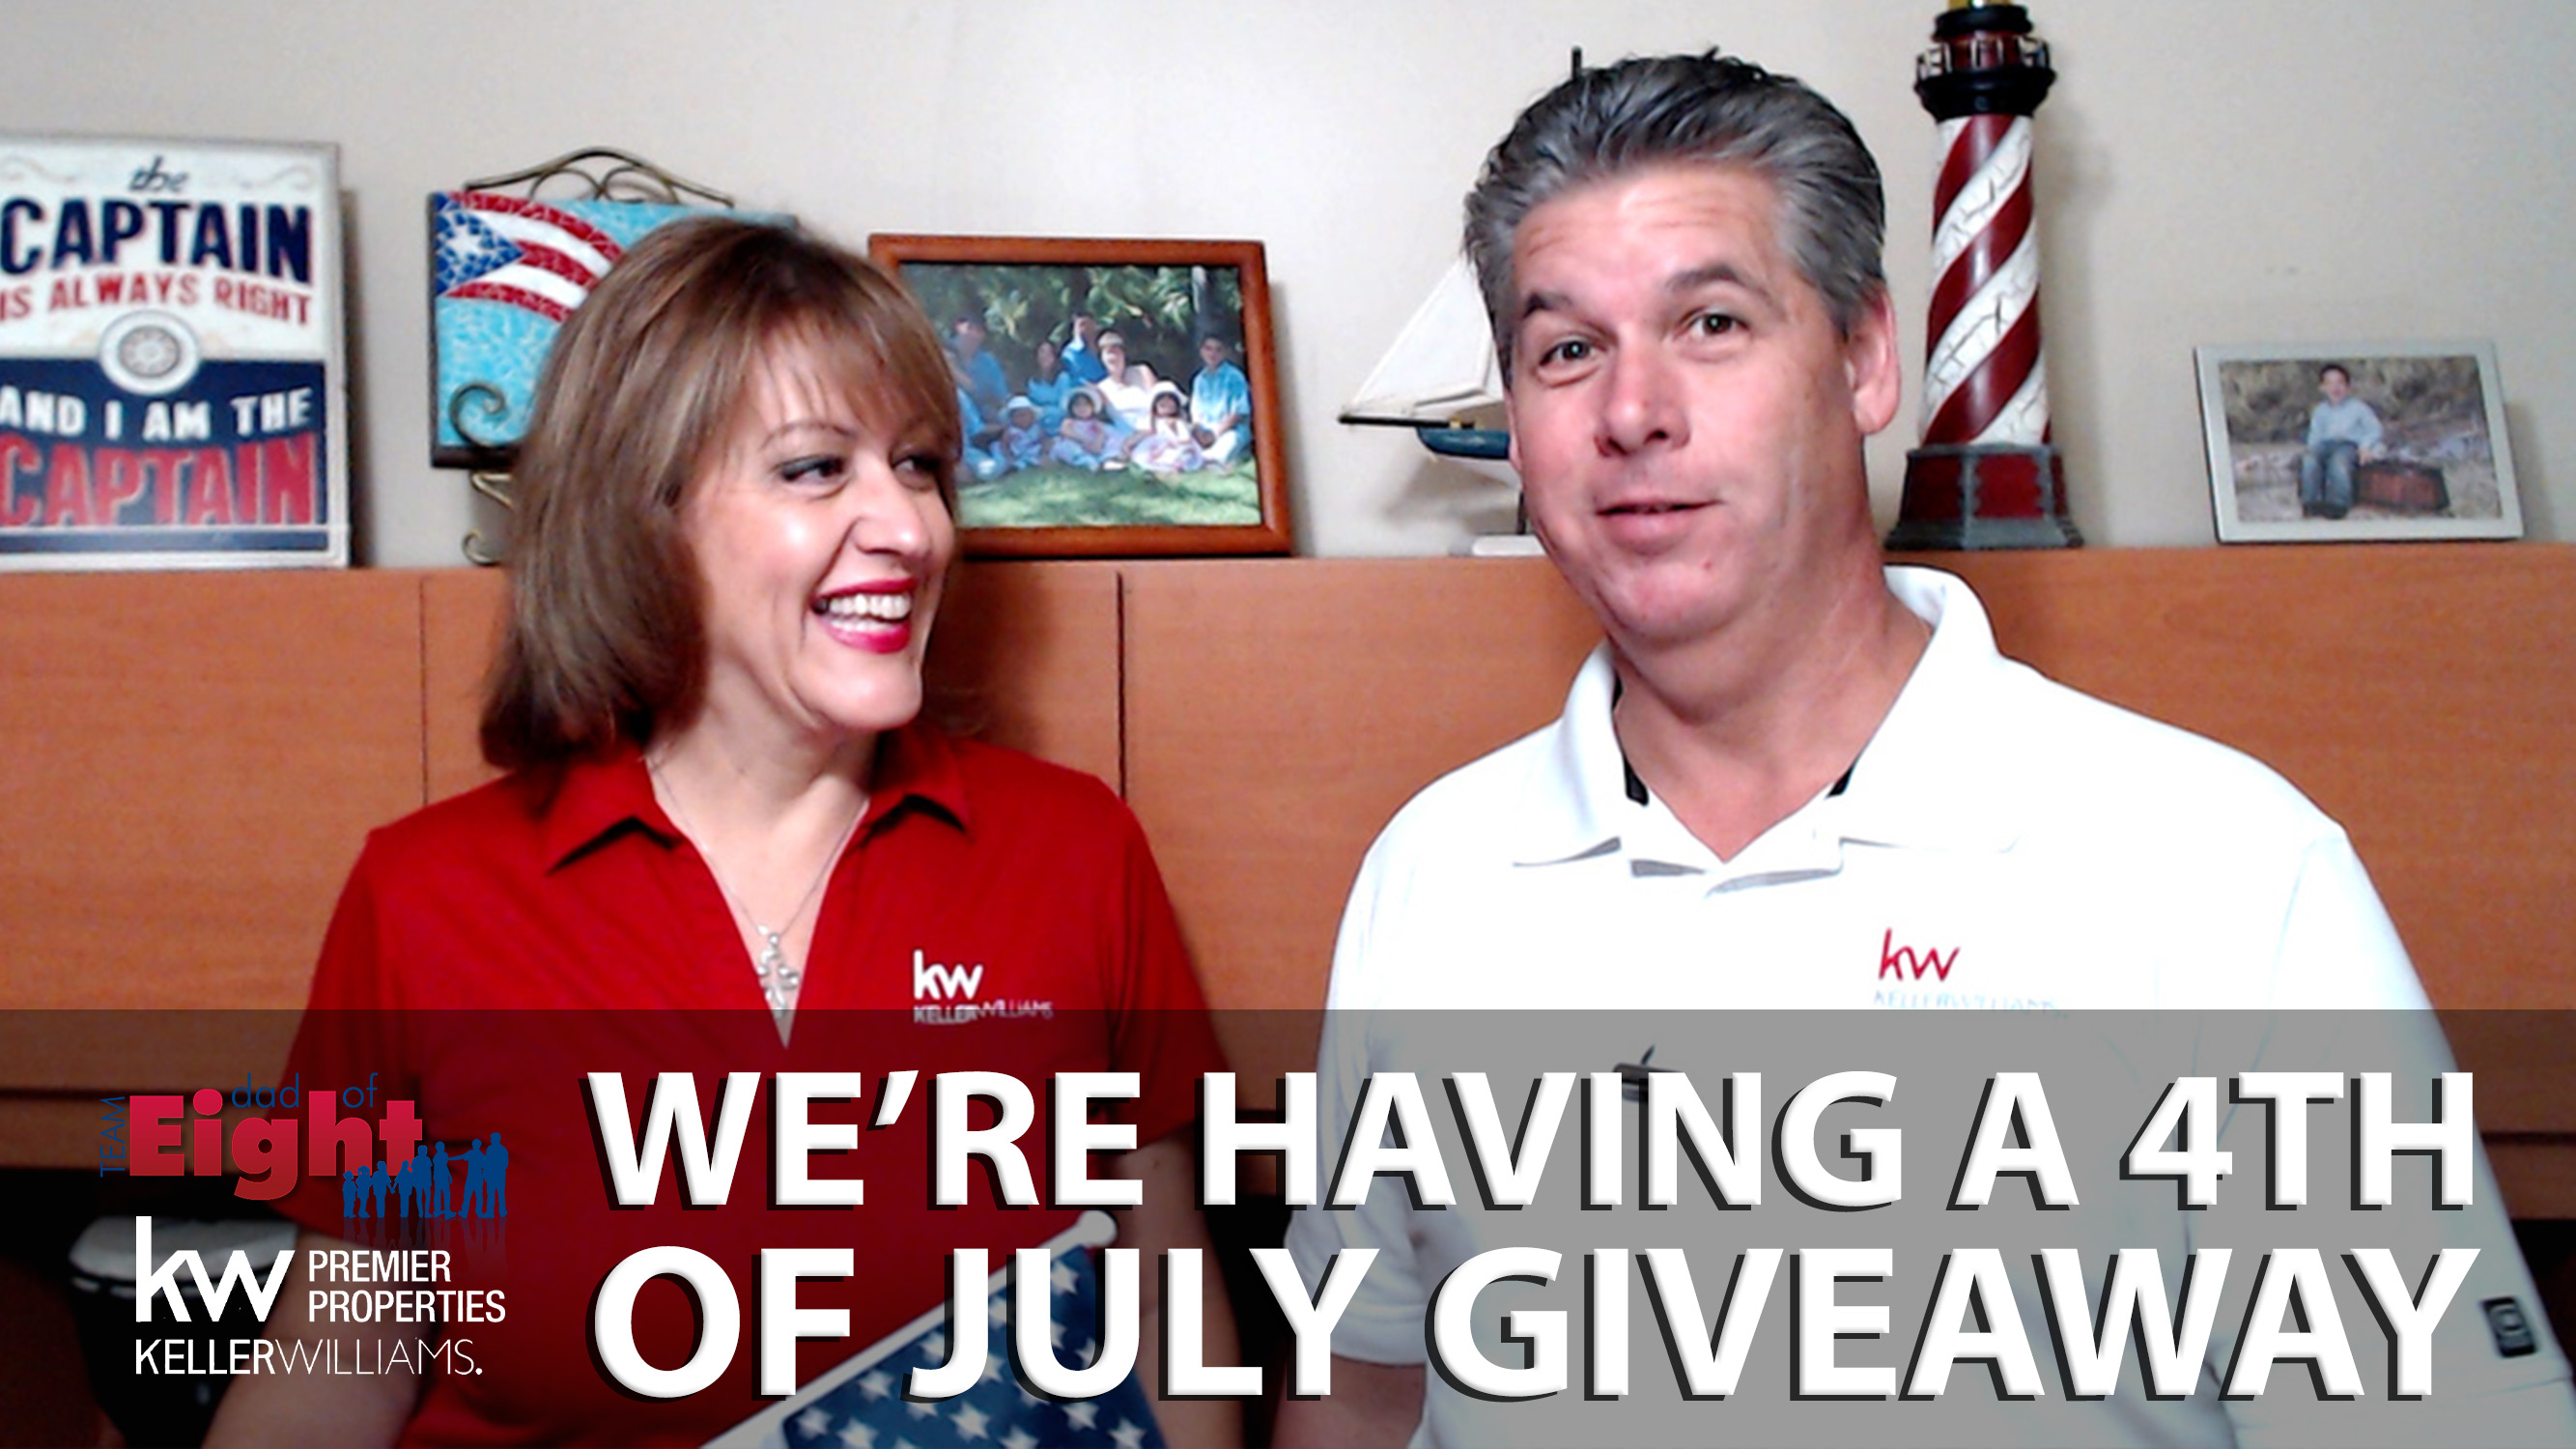 Call in to Our 4th of July Giveaway